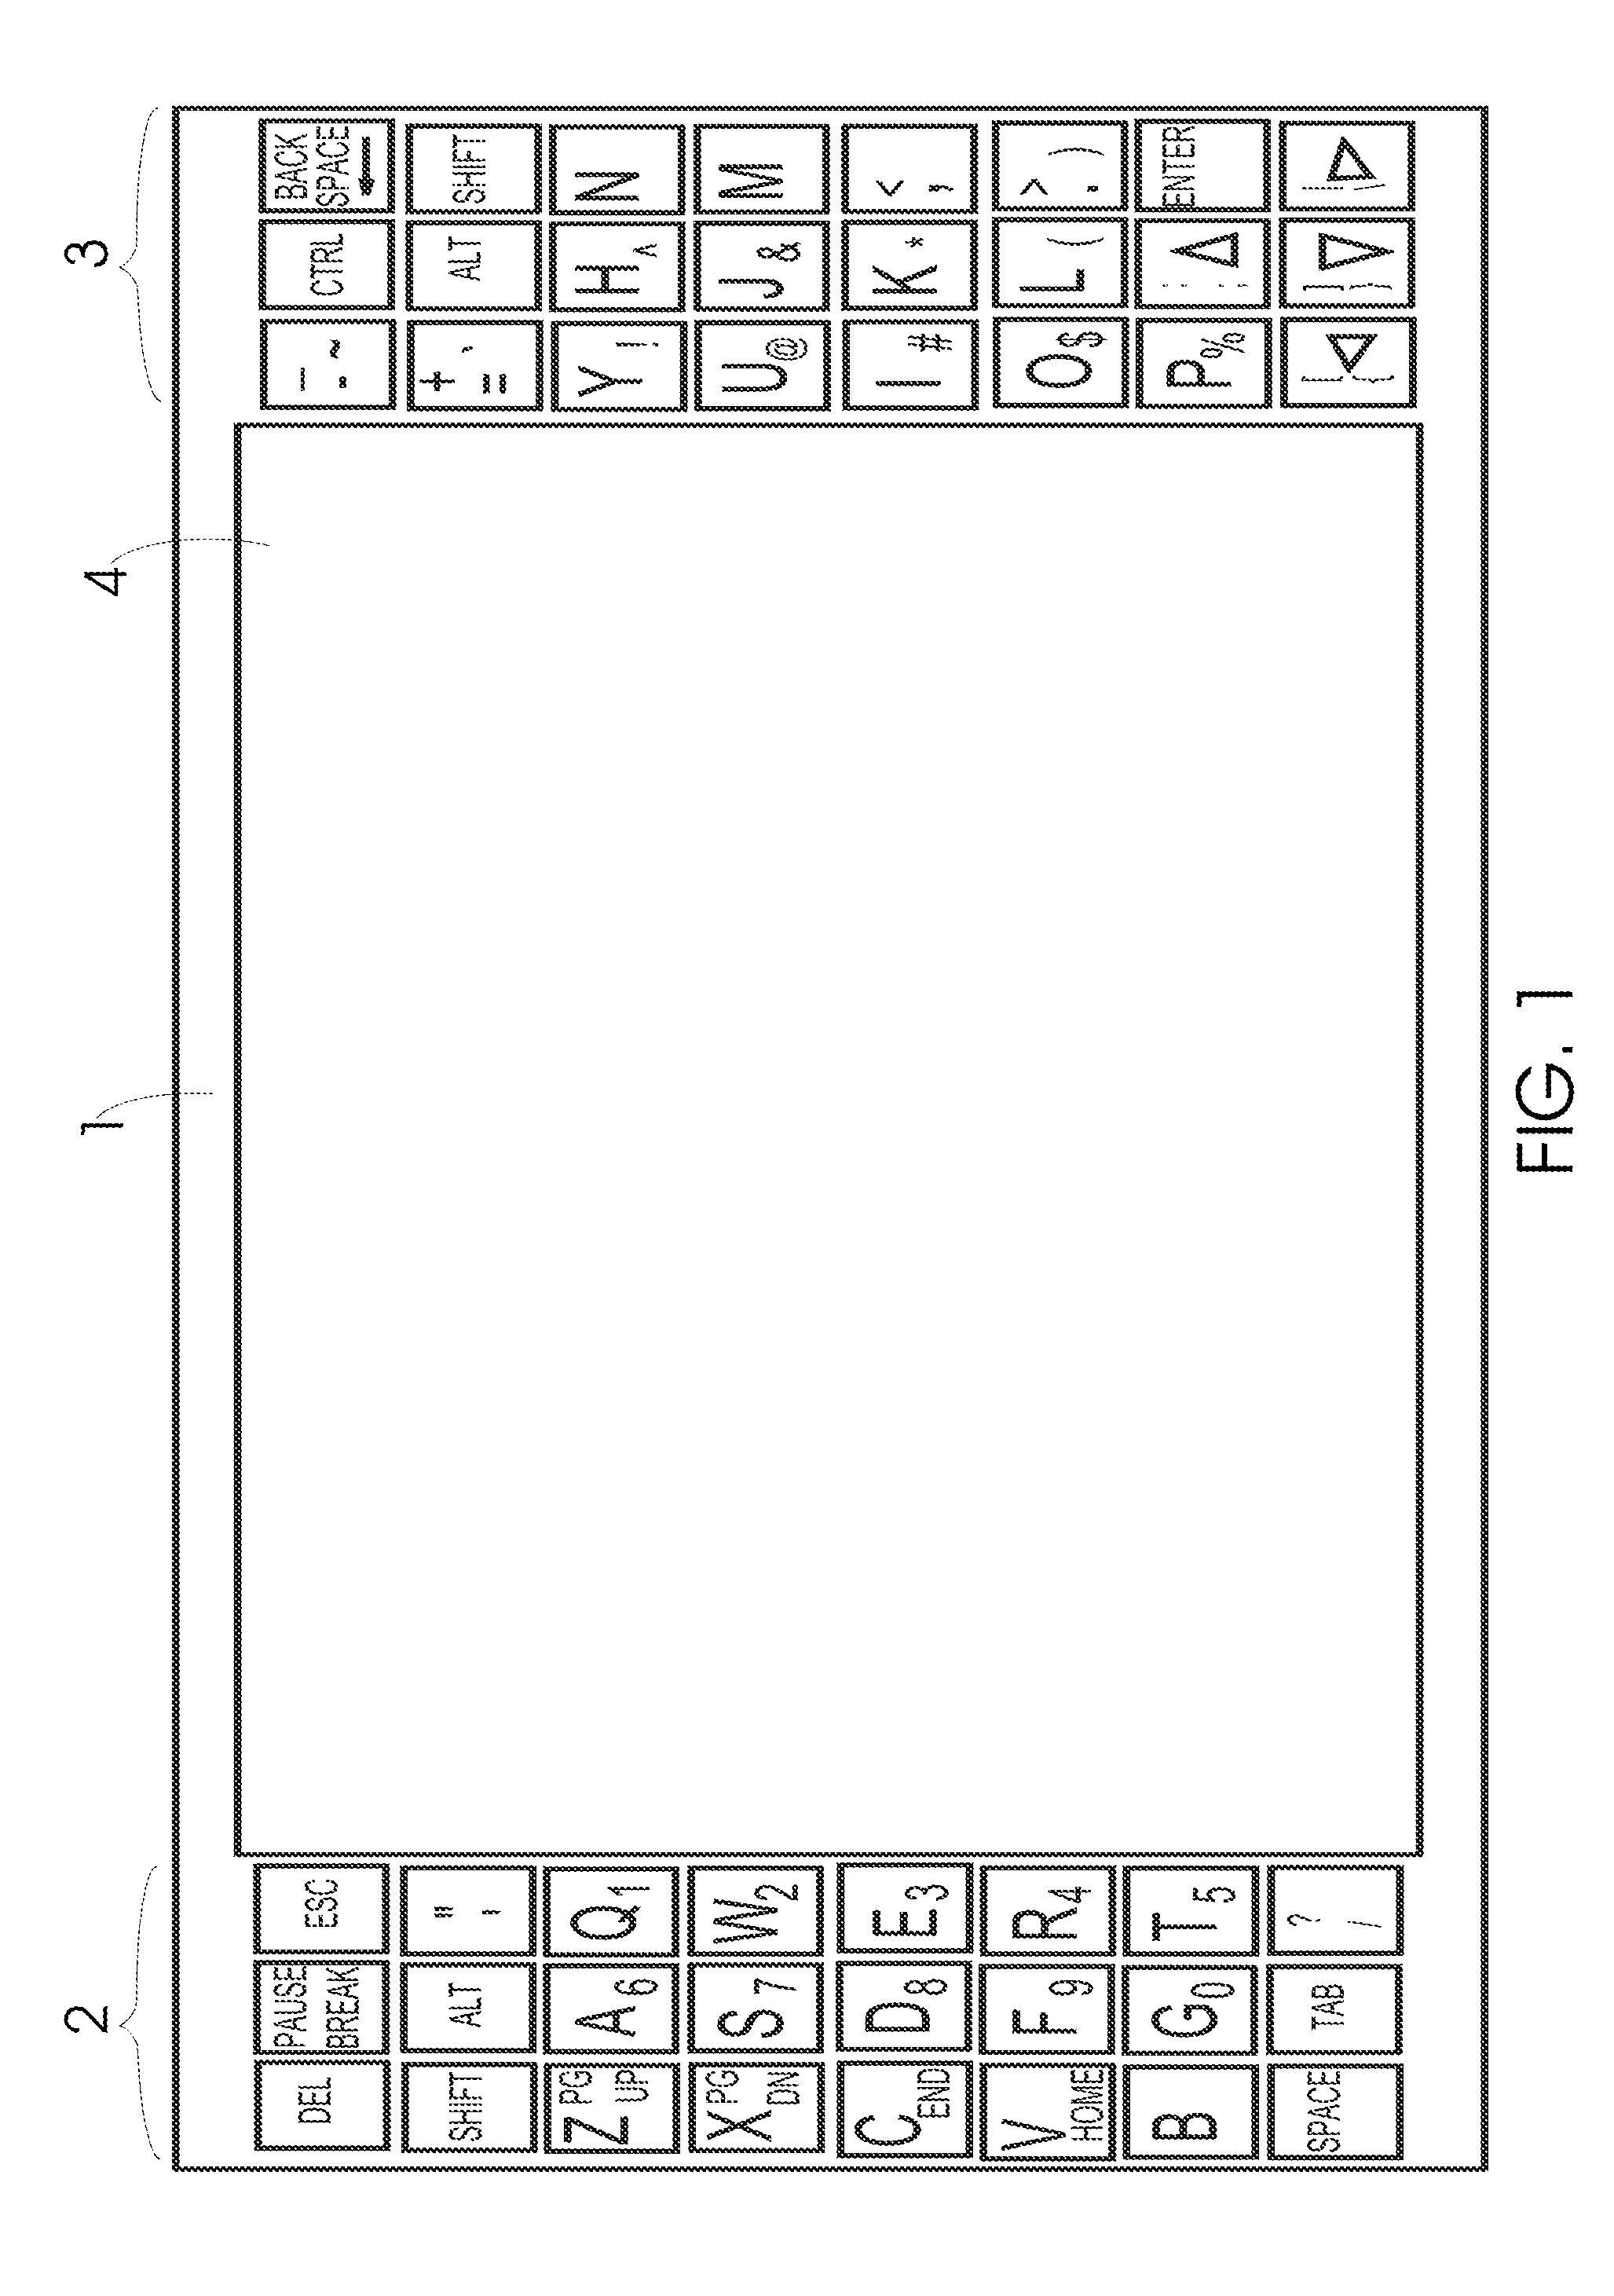 Keyboard and touchpad arrangement for electronic handheld devices